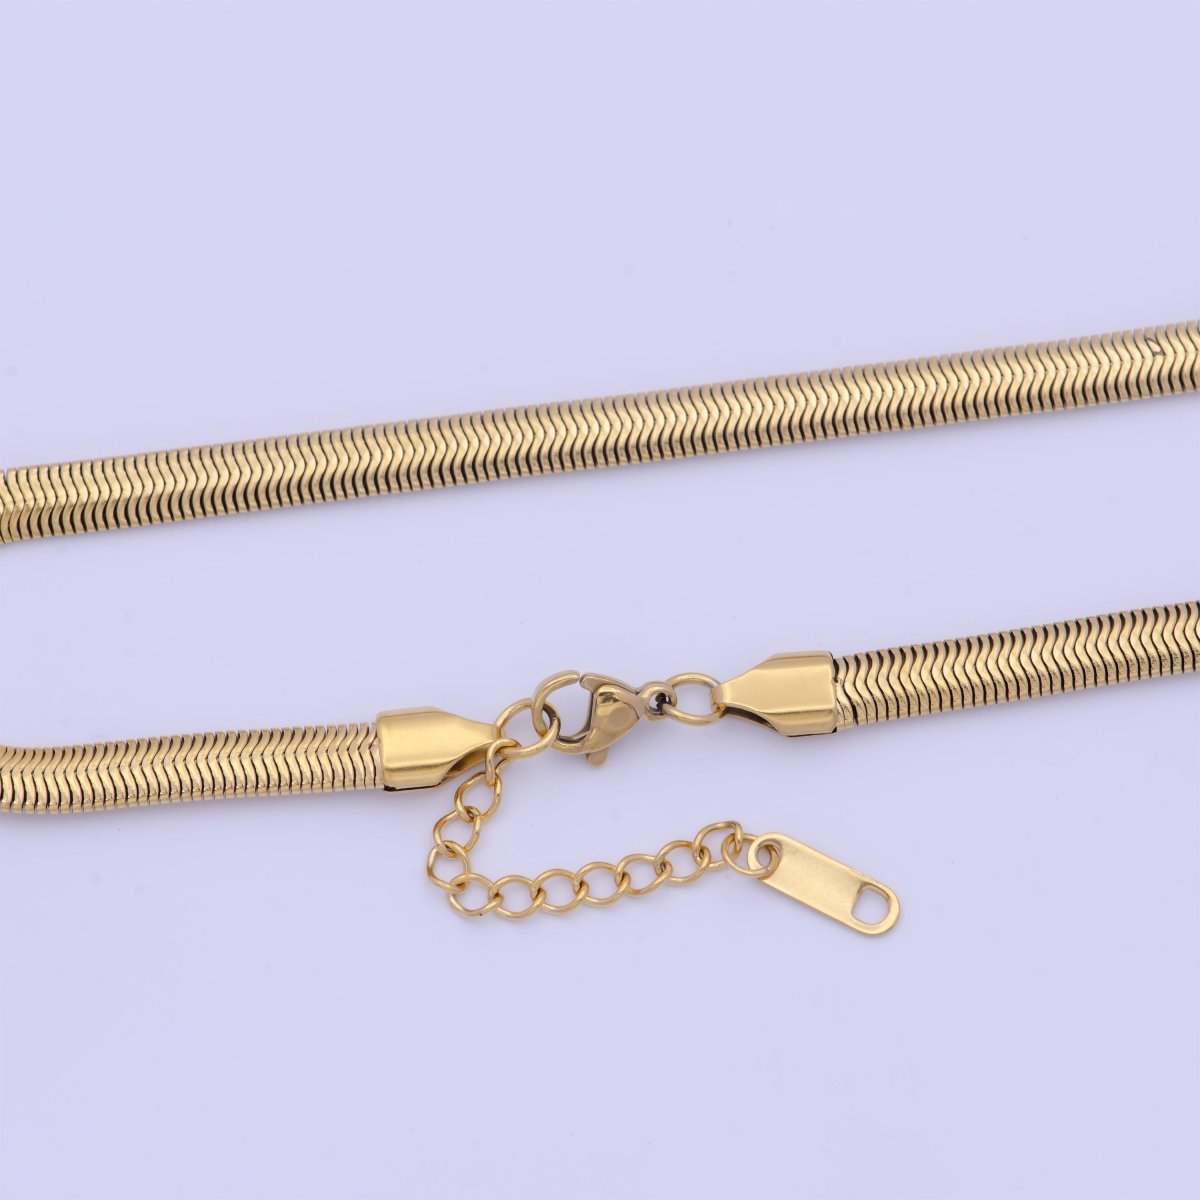 Snake Chain Anklet 9.5 Inch + 1.5" extender Length in 24k Gold Filled Snake Chain | WA-1140 WA-1141 Clearance Pricing - DLUXCA